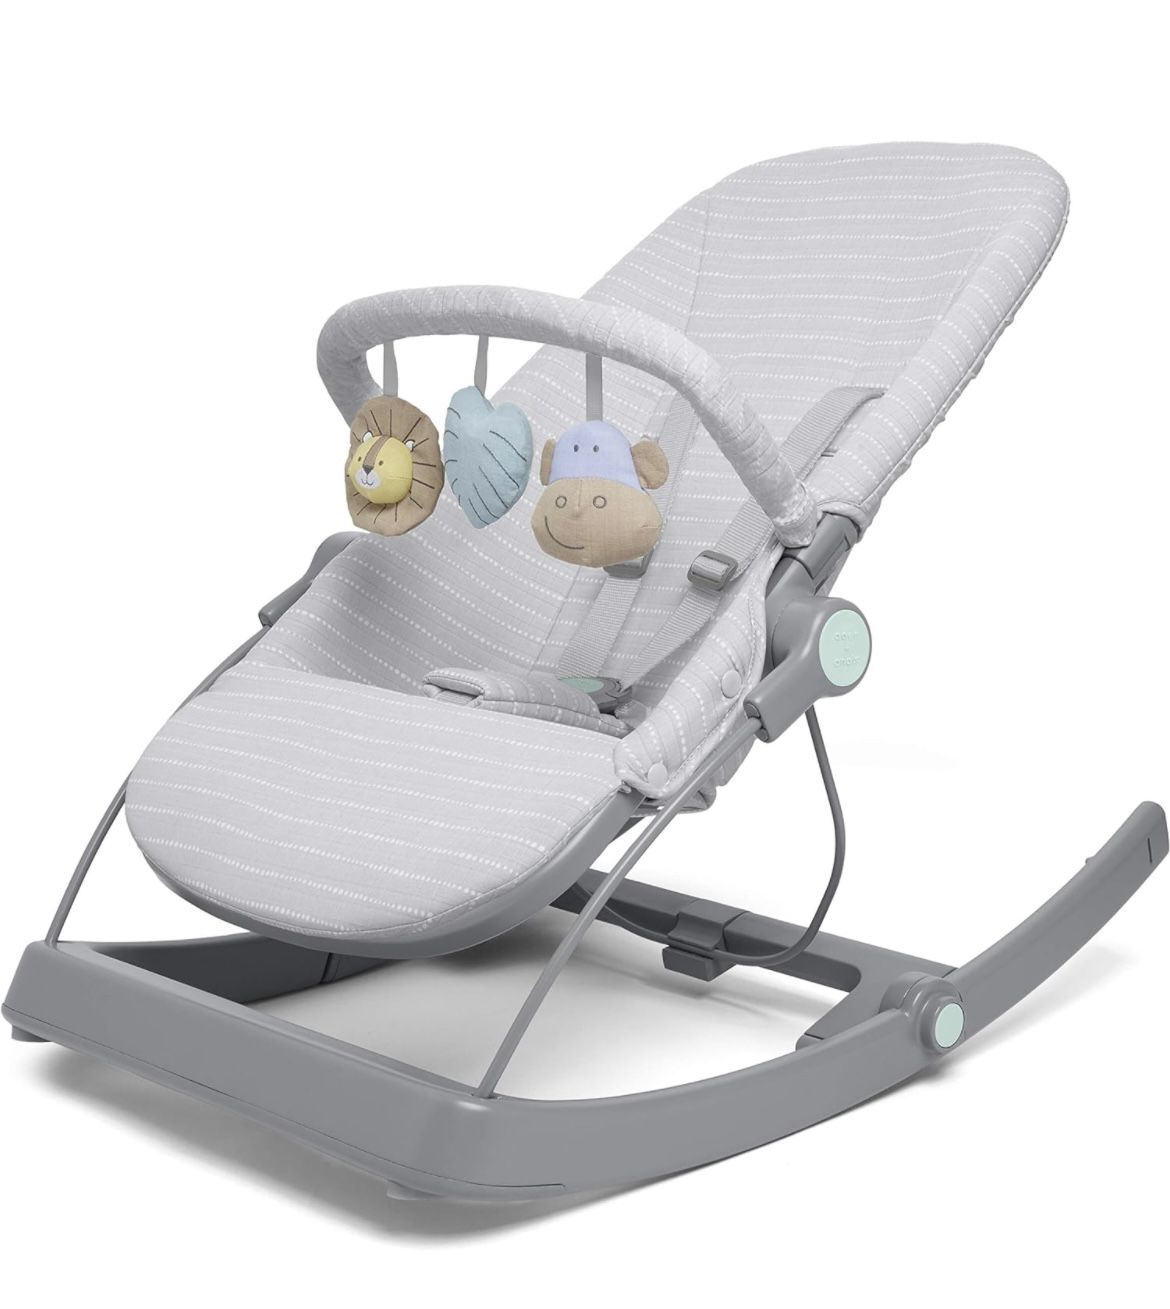 Brand New! aden + anais 3-in-1 Infant to Toddler Transition Seat. from newborn to 2 years old